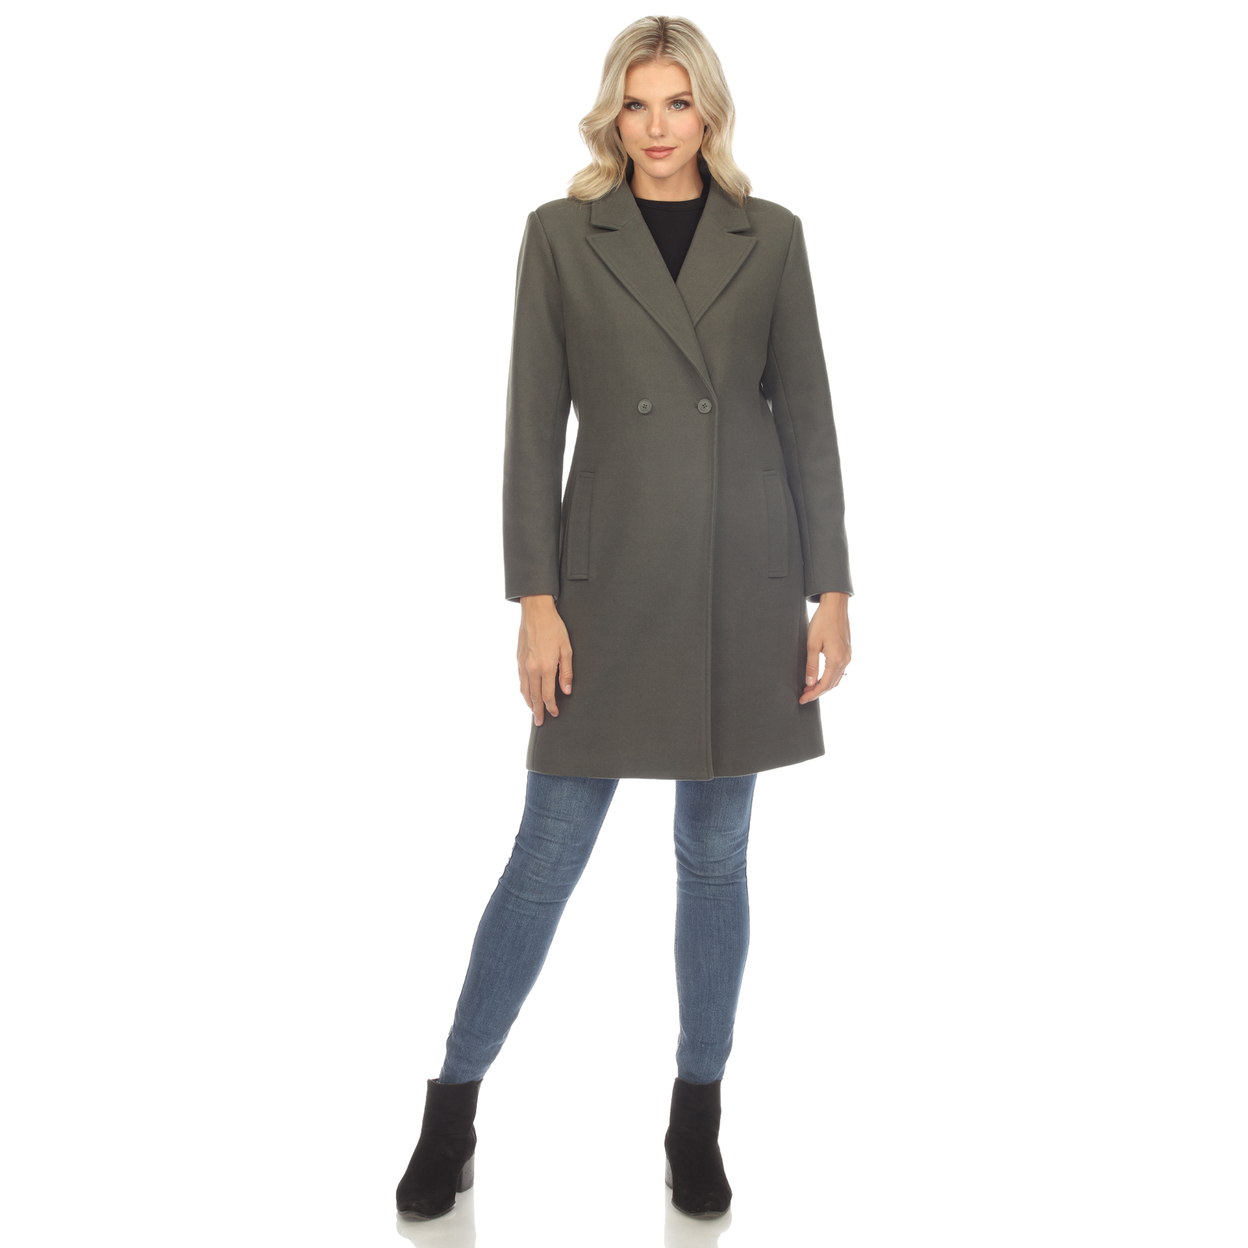 White Mark Women's Long Sleeve Classic Double-Breasted Walker Coat - Olive, X-Large